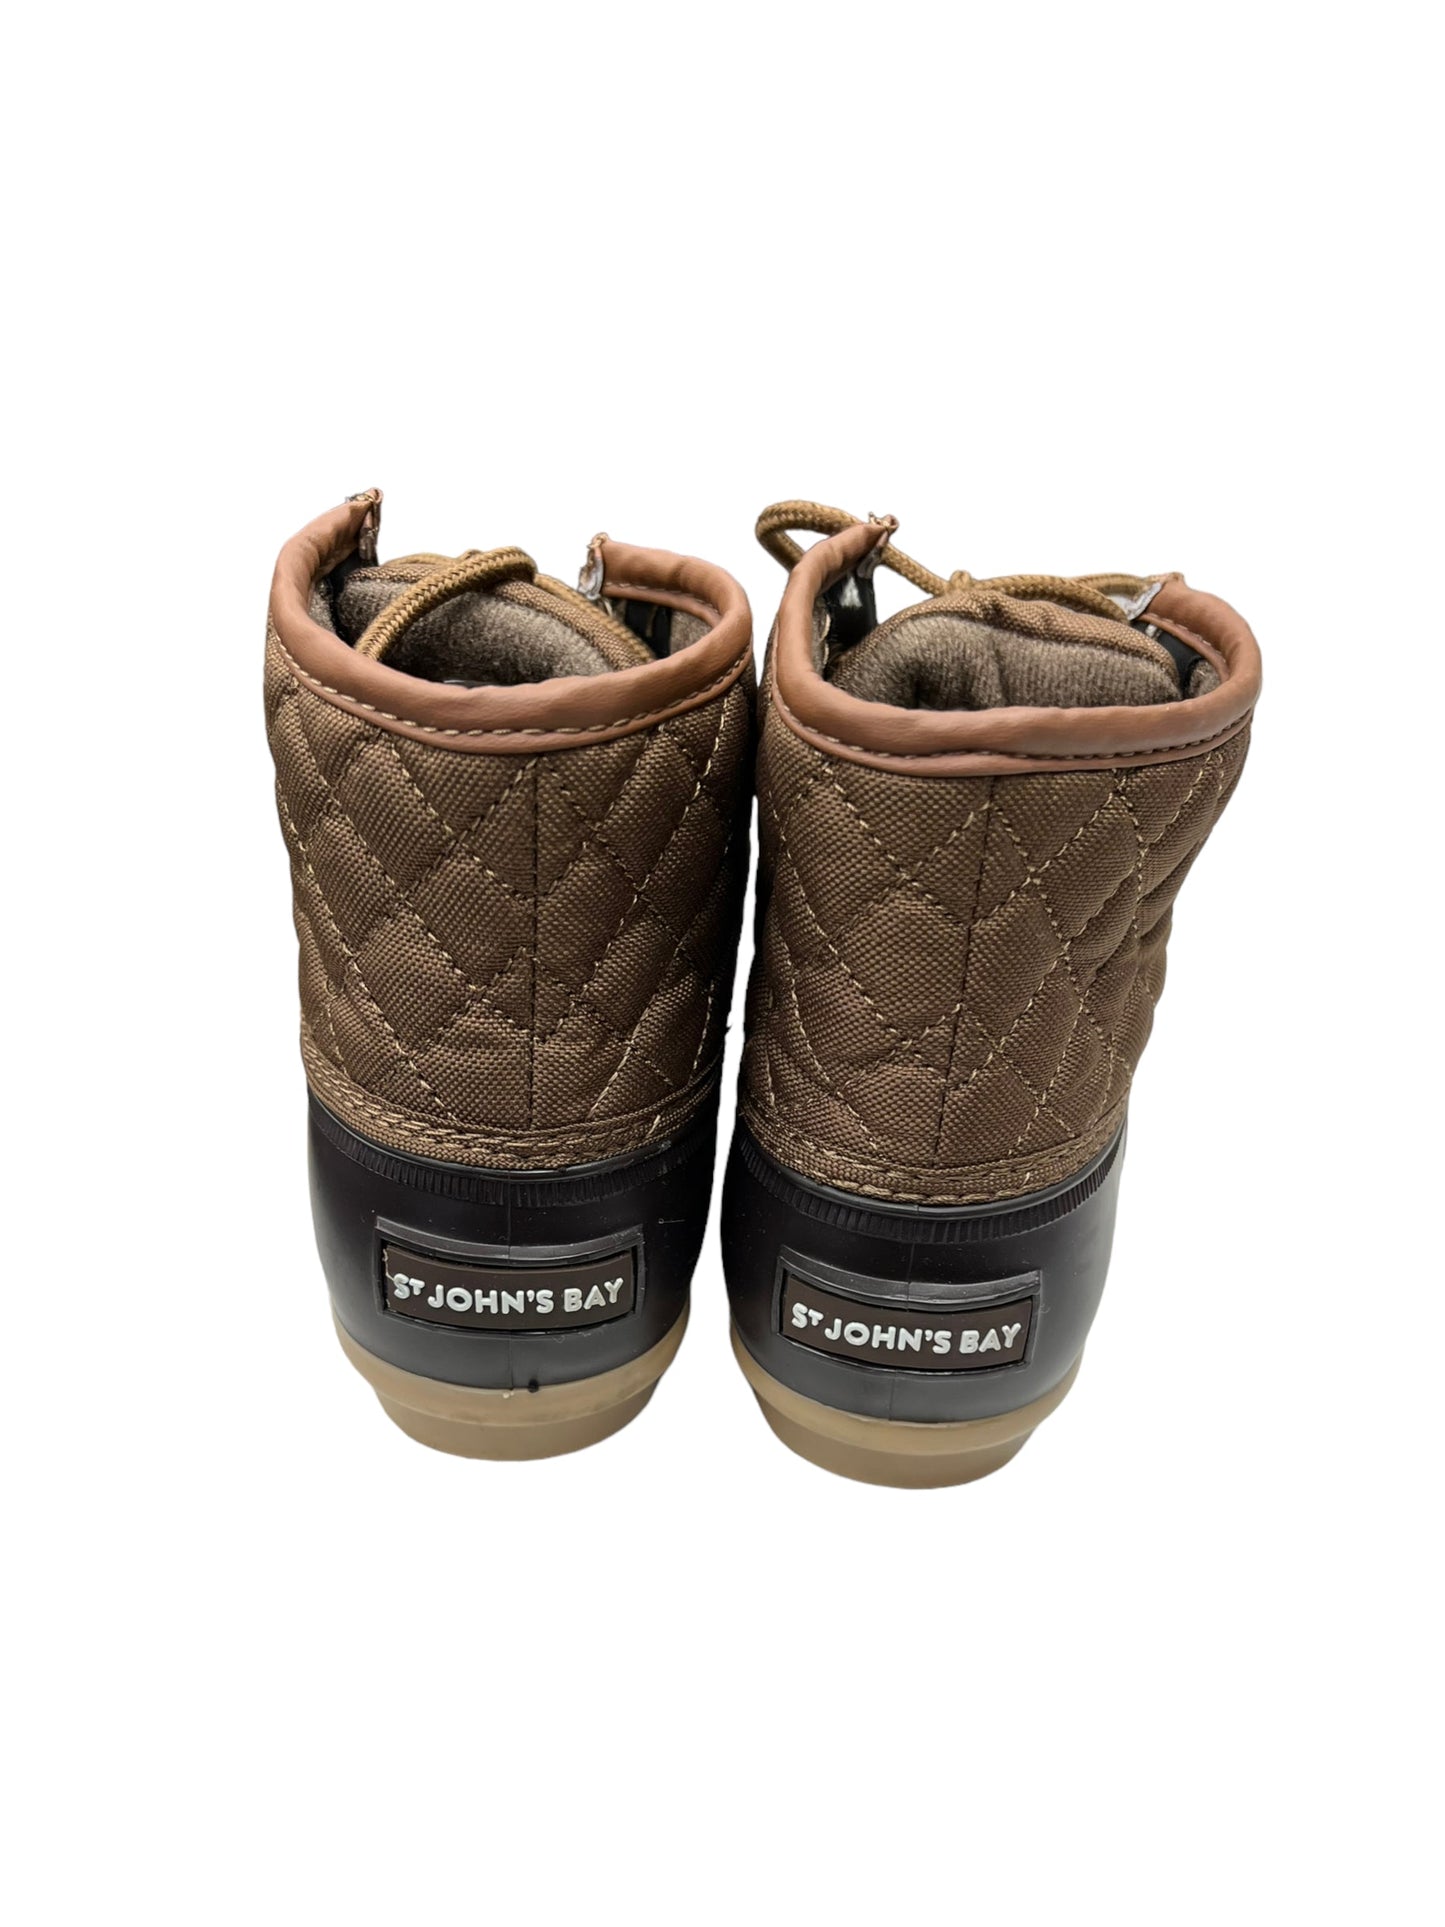 Boots Snow By St Johns Bay  Size: 8